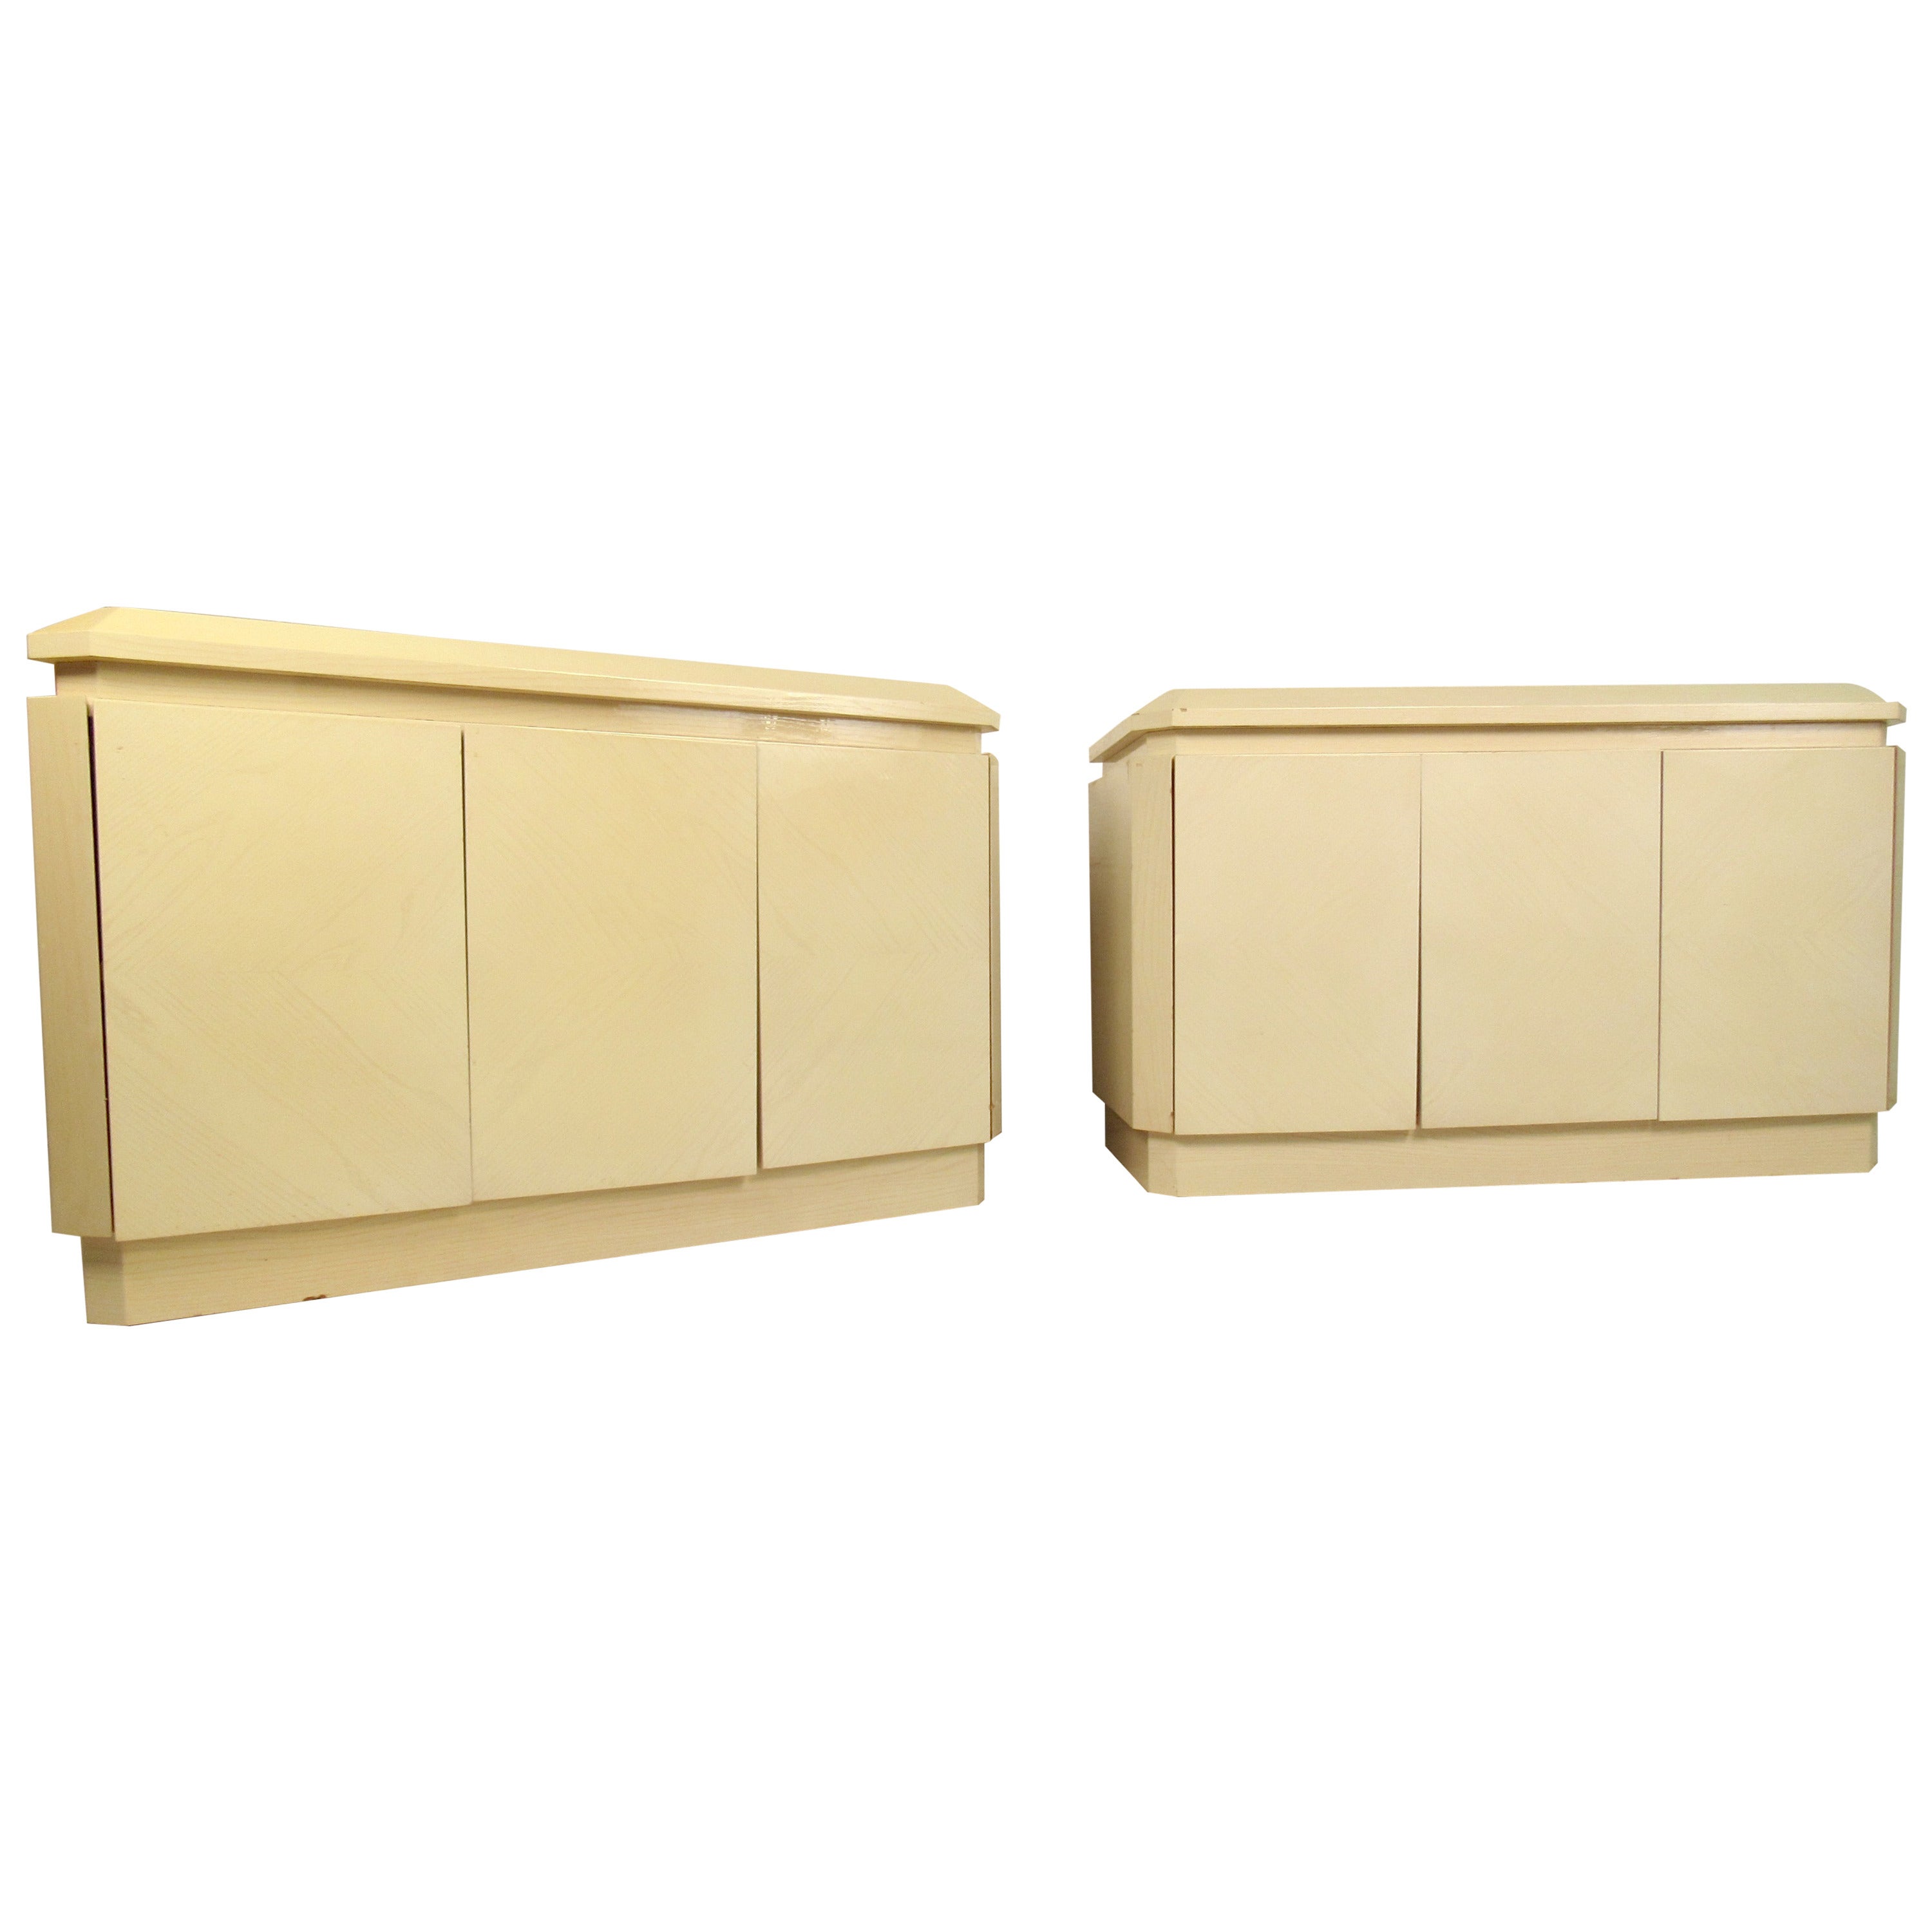 Pair Vintage Modern Lacquer Sideboards